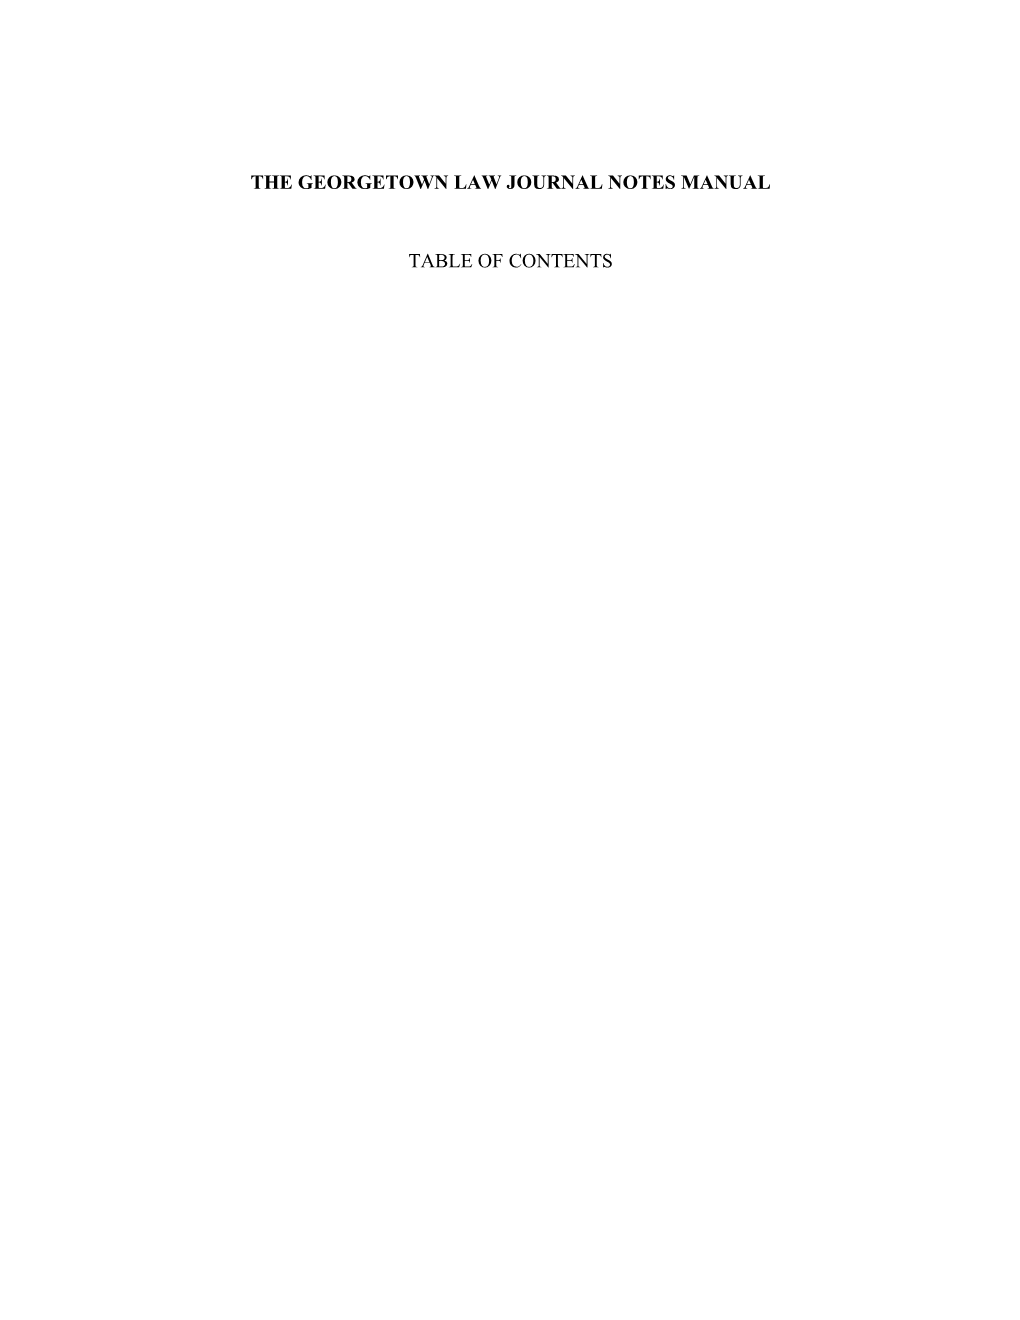 The Georgetown Law Journal Notes Manual